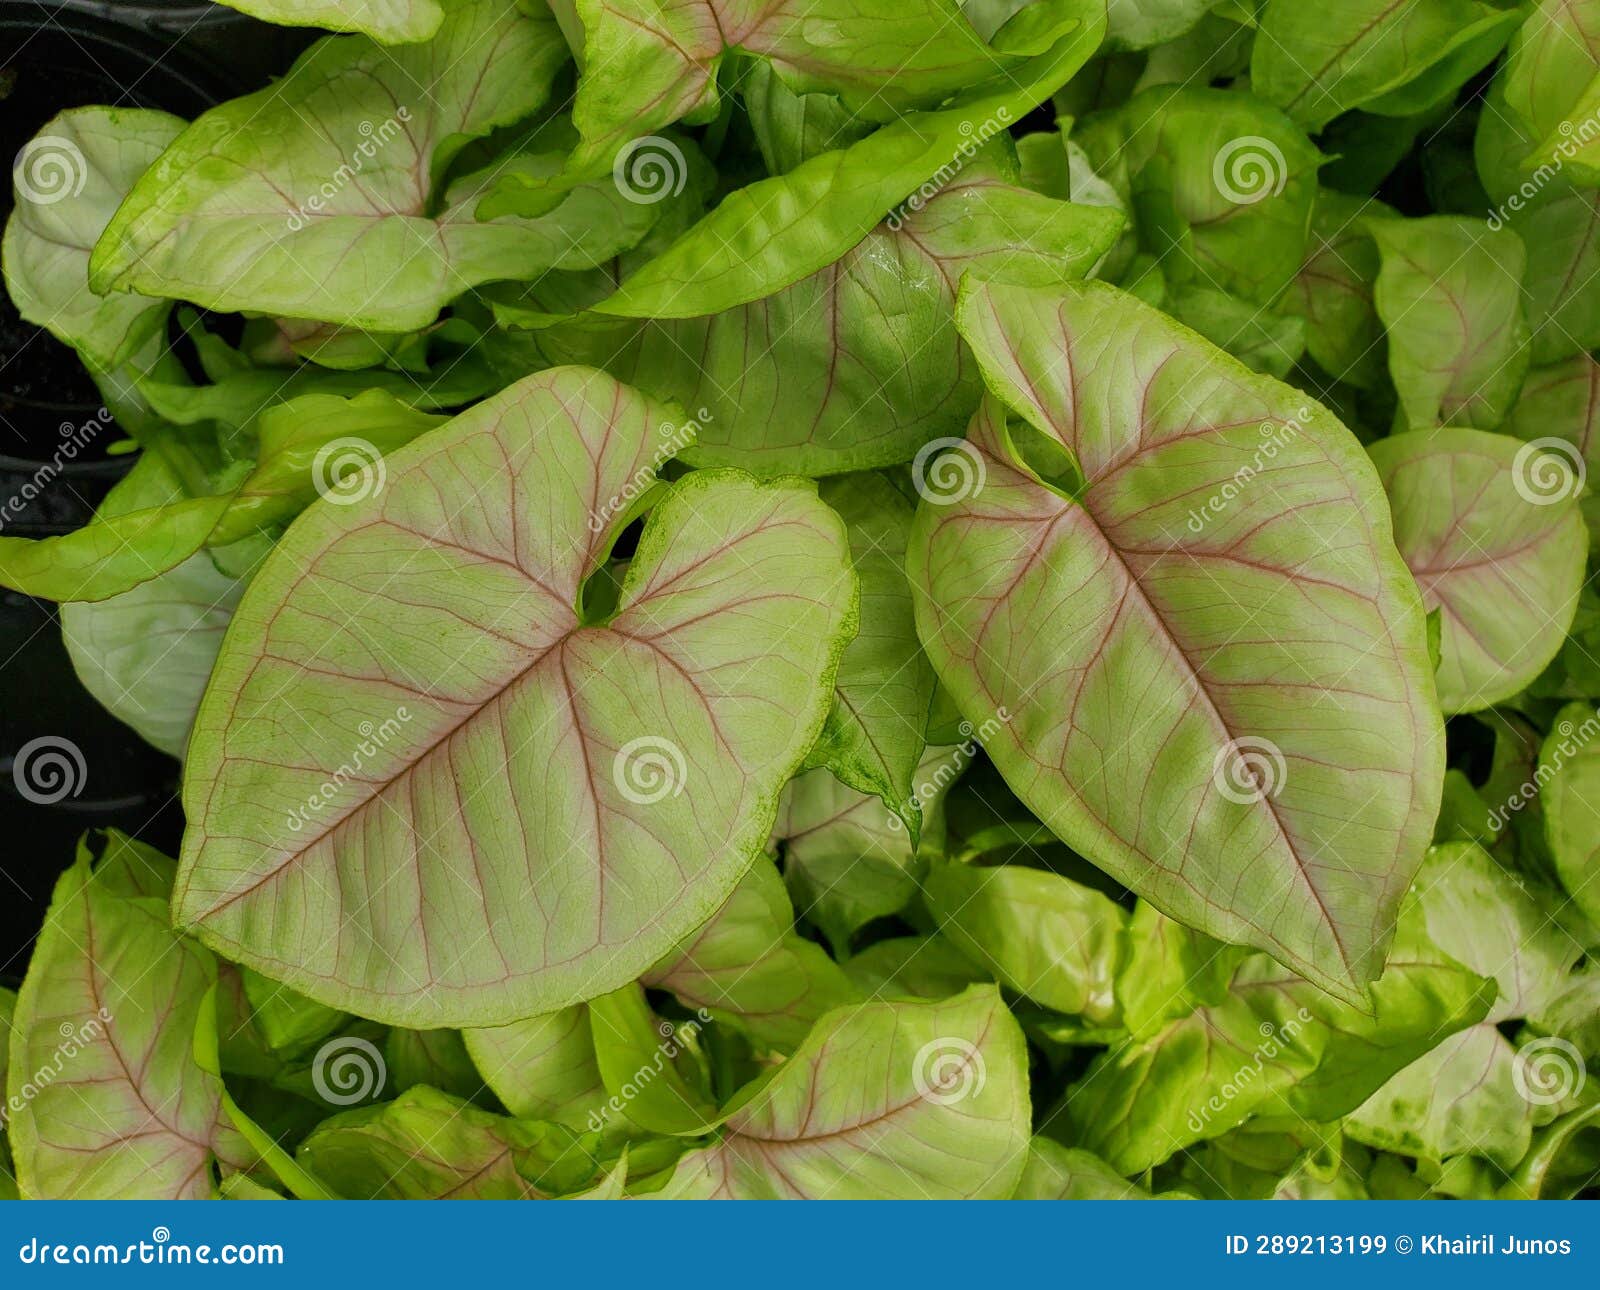 closeup of the bright leaves of syngonium chiffon allusion